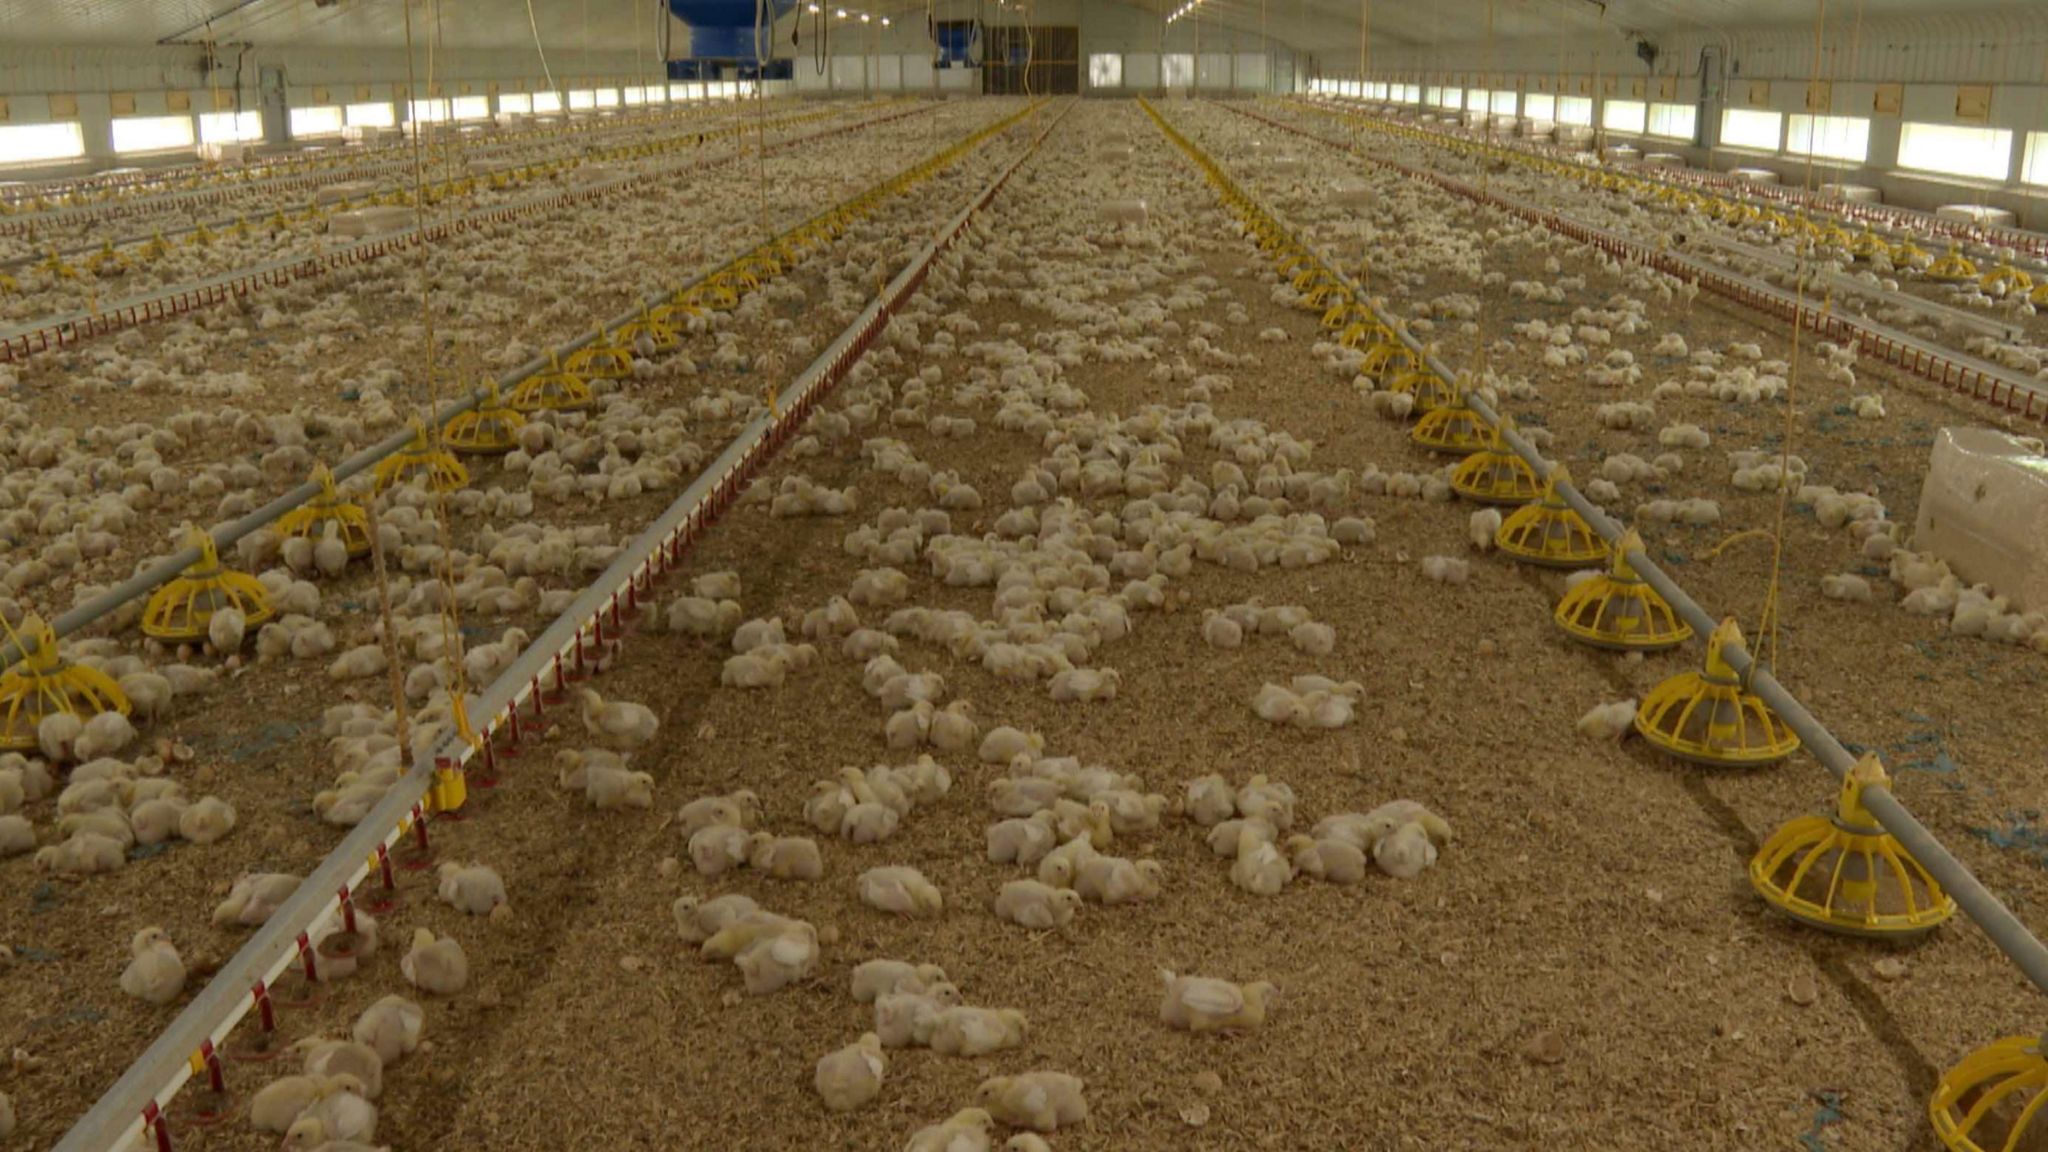 Cranswick chicken shed with 43,000 chickens in it.